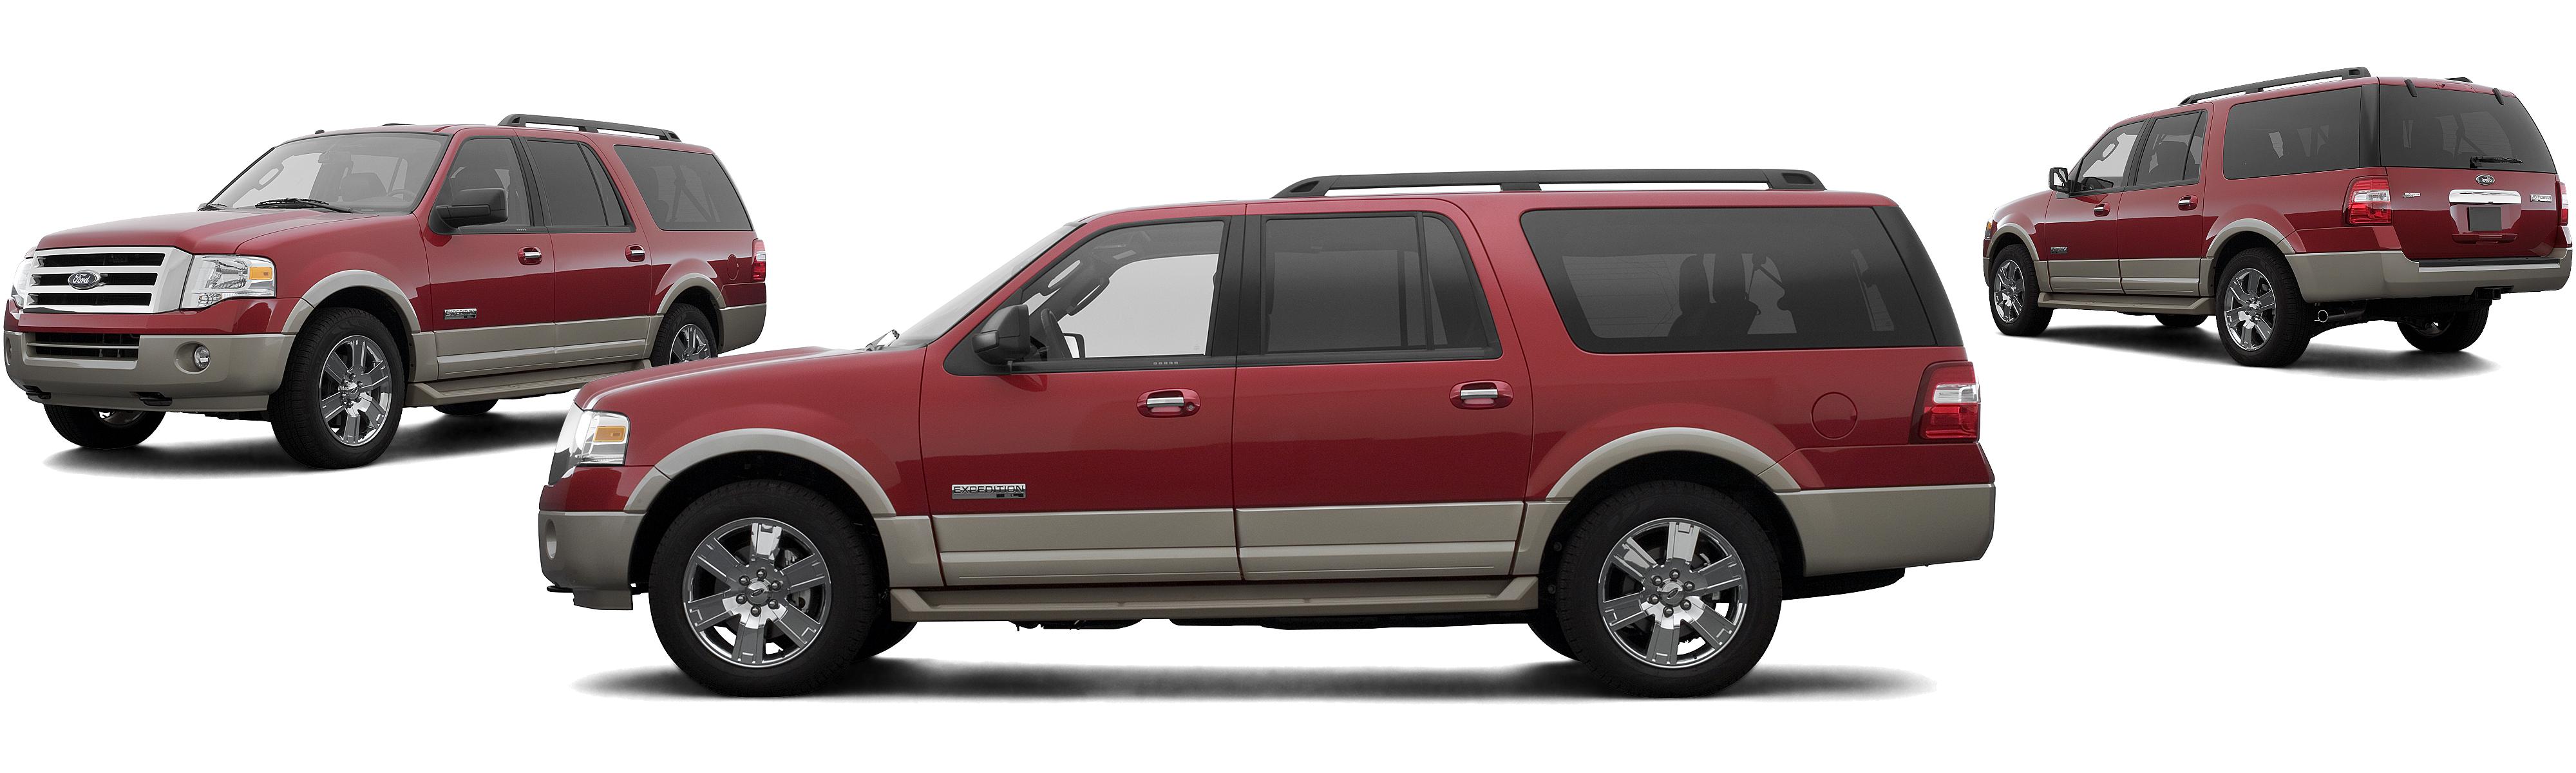 2007 Ford Expedition EL 4WD Eddie Bauer 4dr SUV - Research - GrooveCar